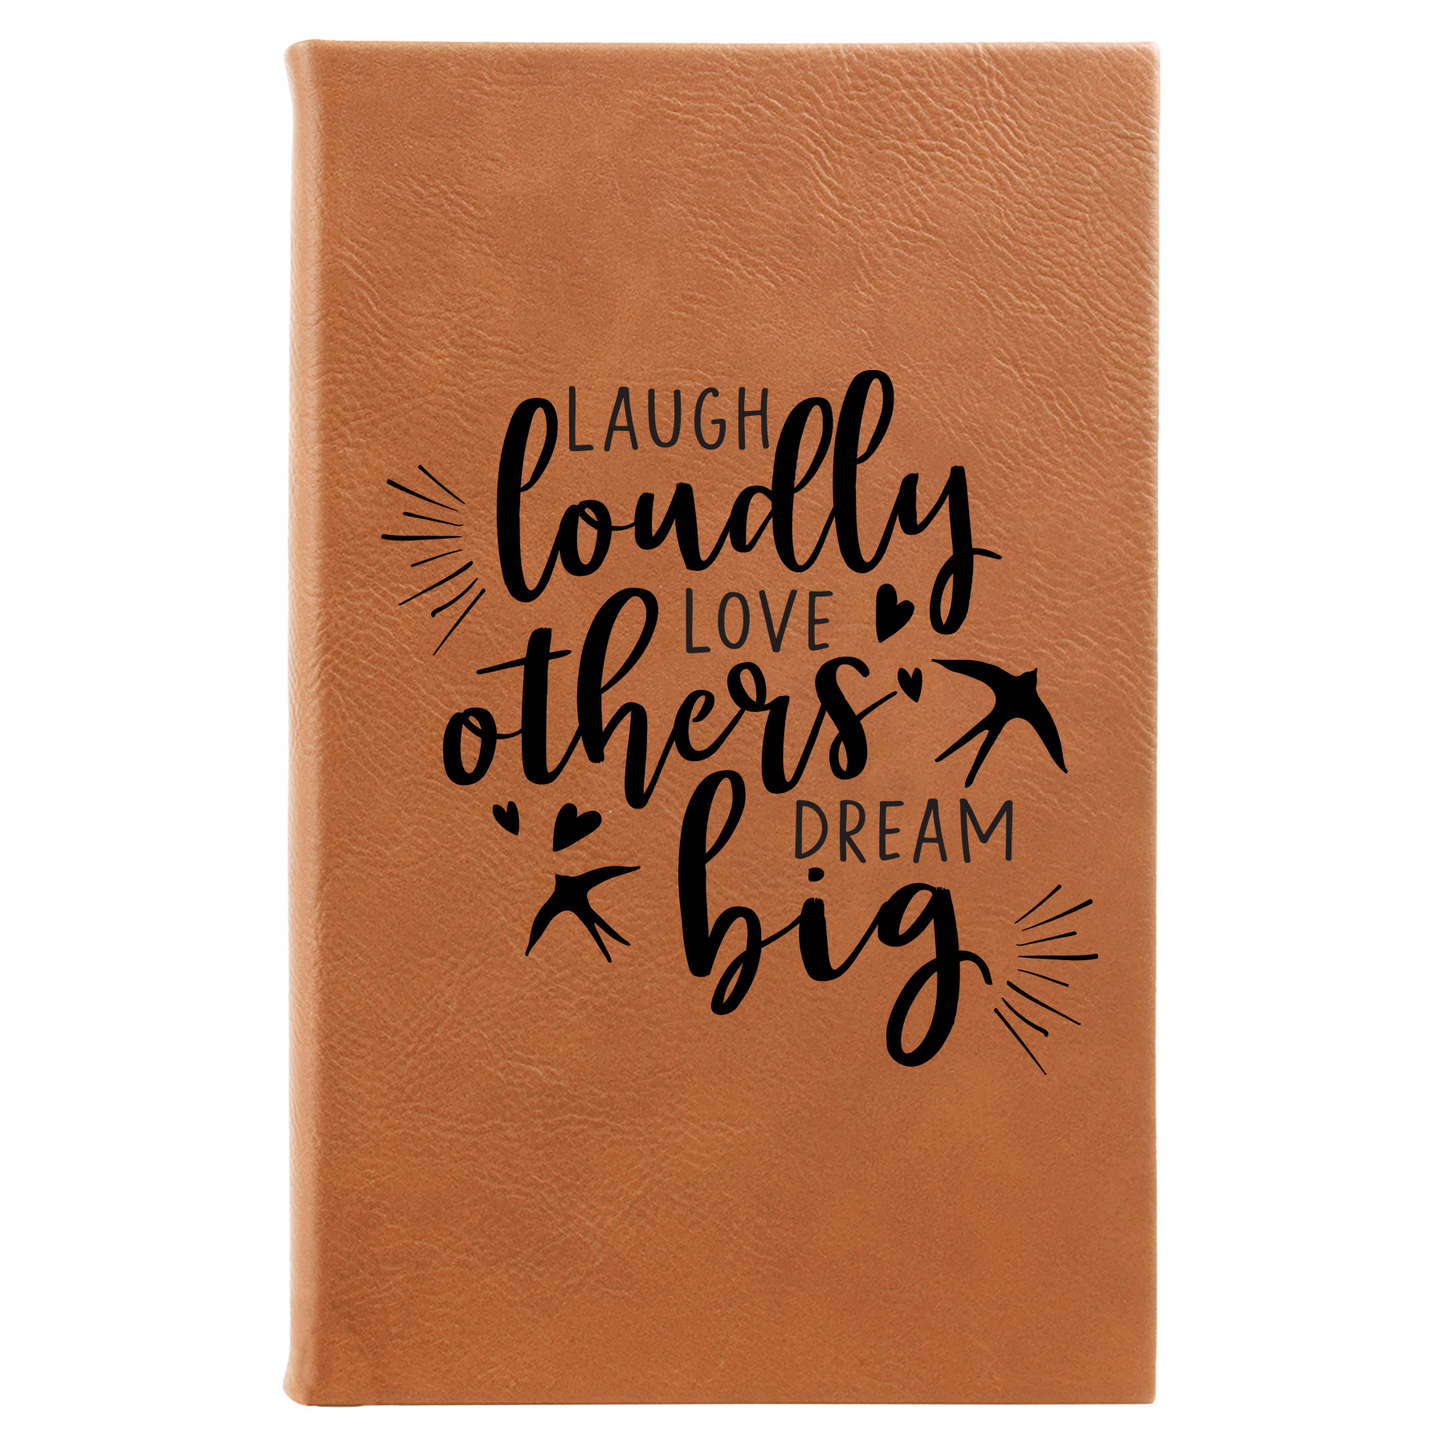 Laugh Loudly Lined Leatherette Journal